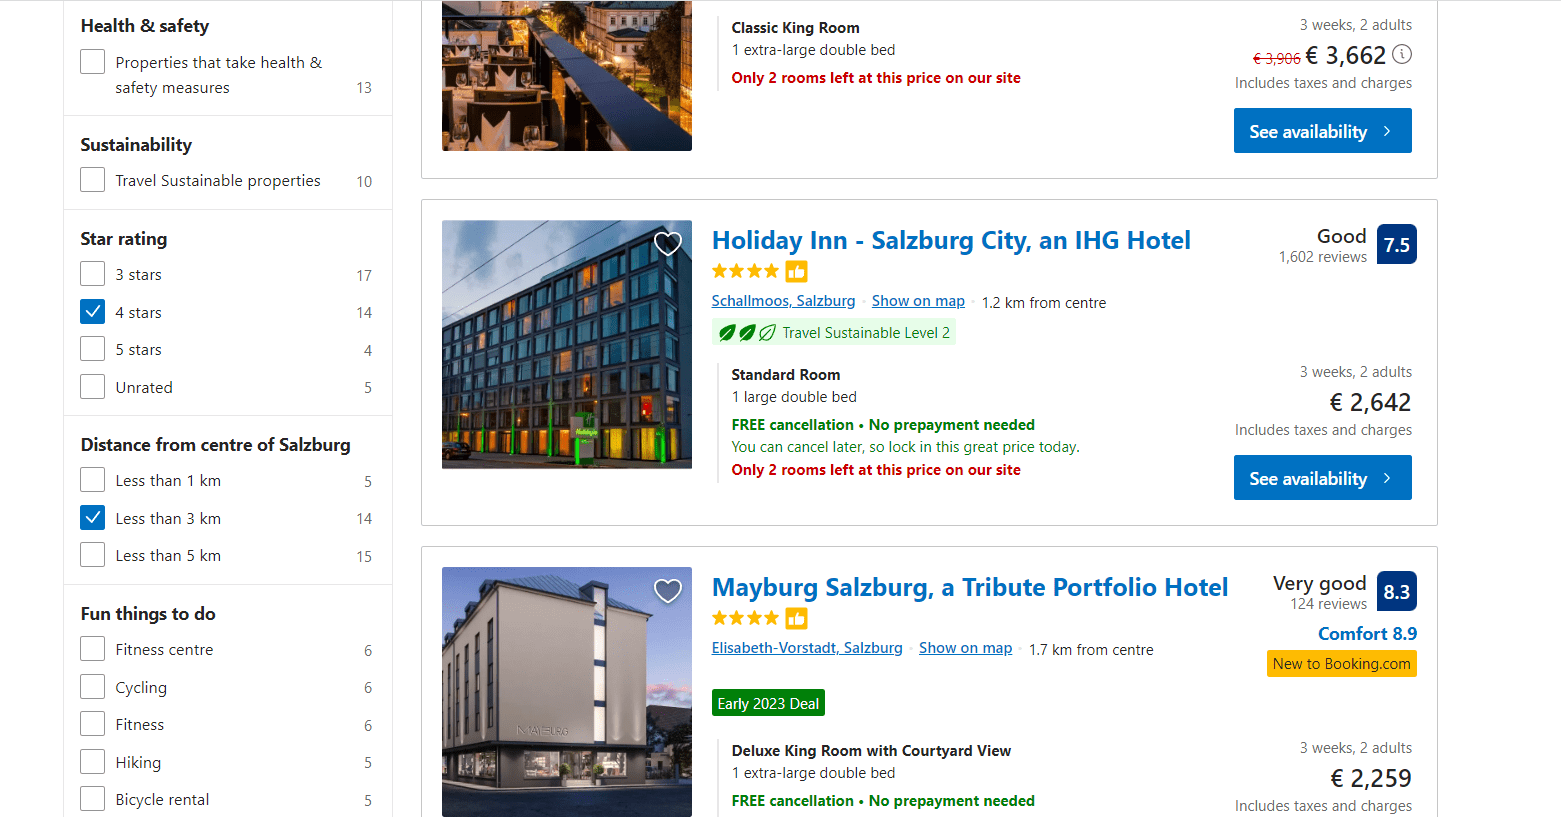 Booking.com that uses facets on the left-hand side to allow users to browse by location, star rating, and hotel features